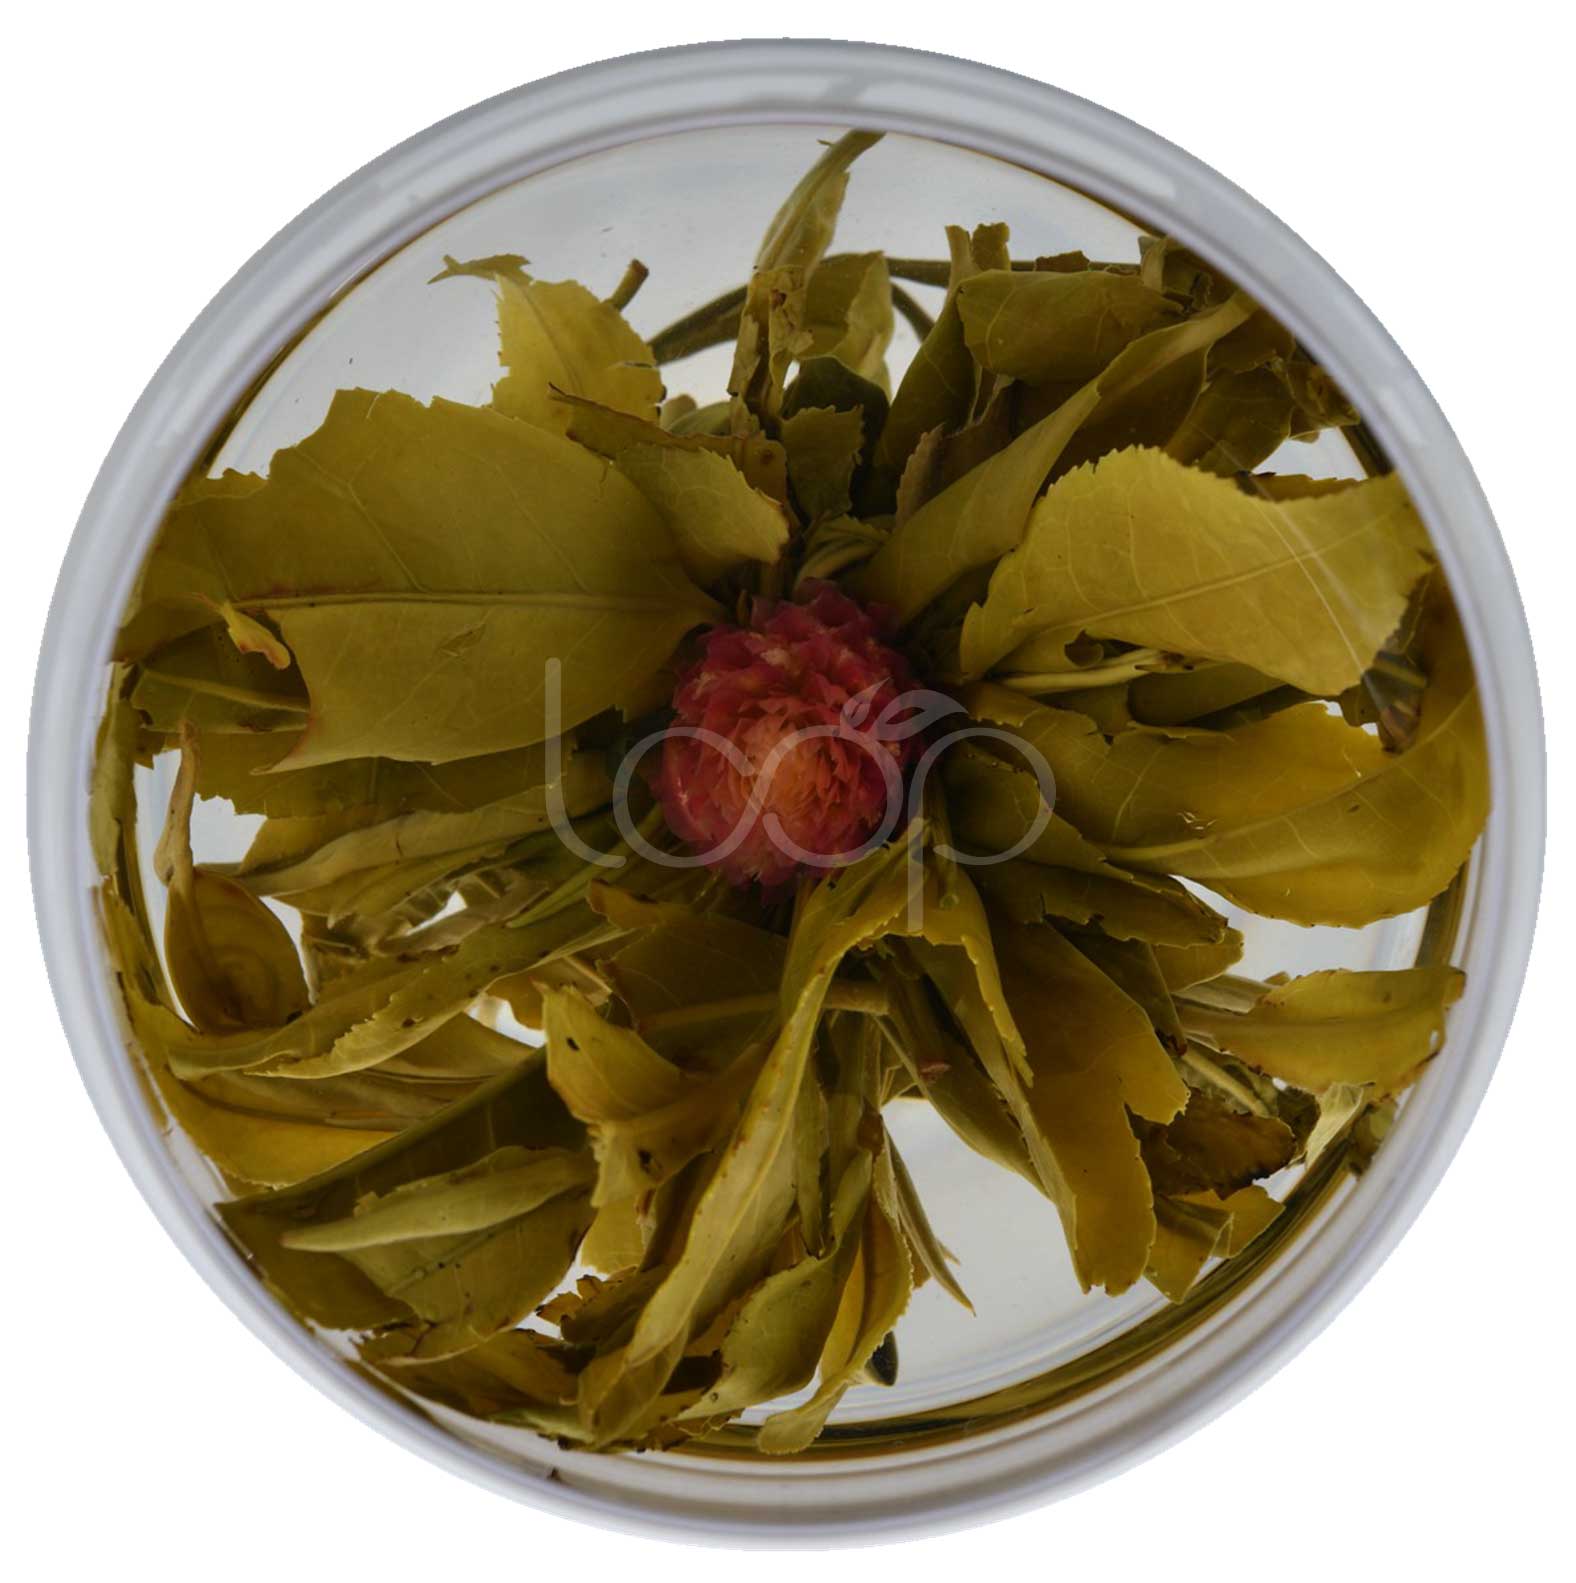 2022 High quality Bloomingteas - Blooming Tea One Red On The Top – Goodtea